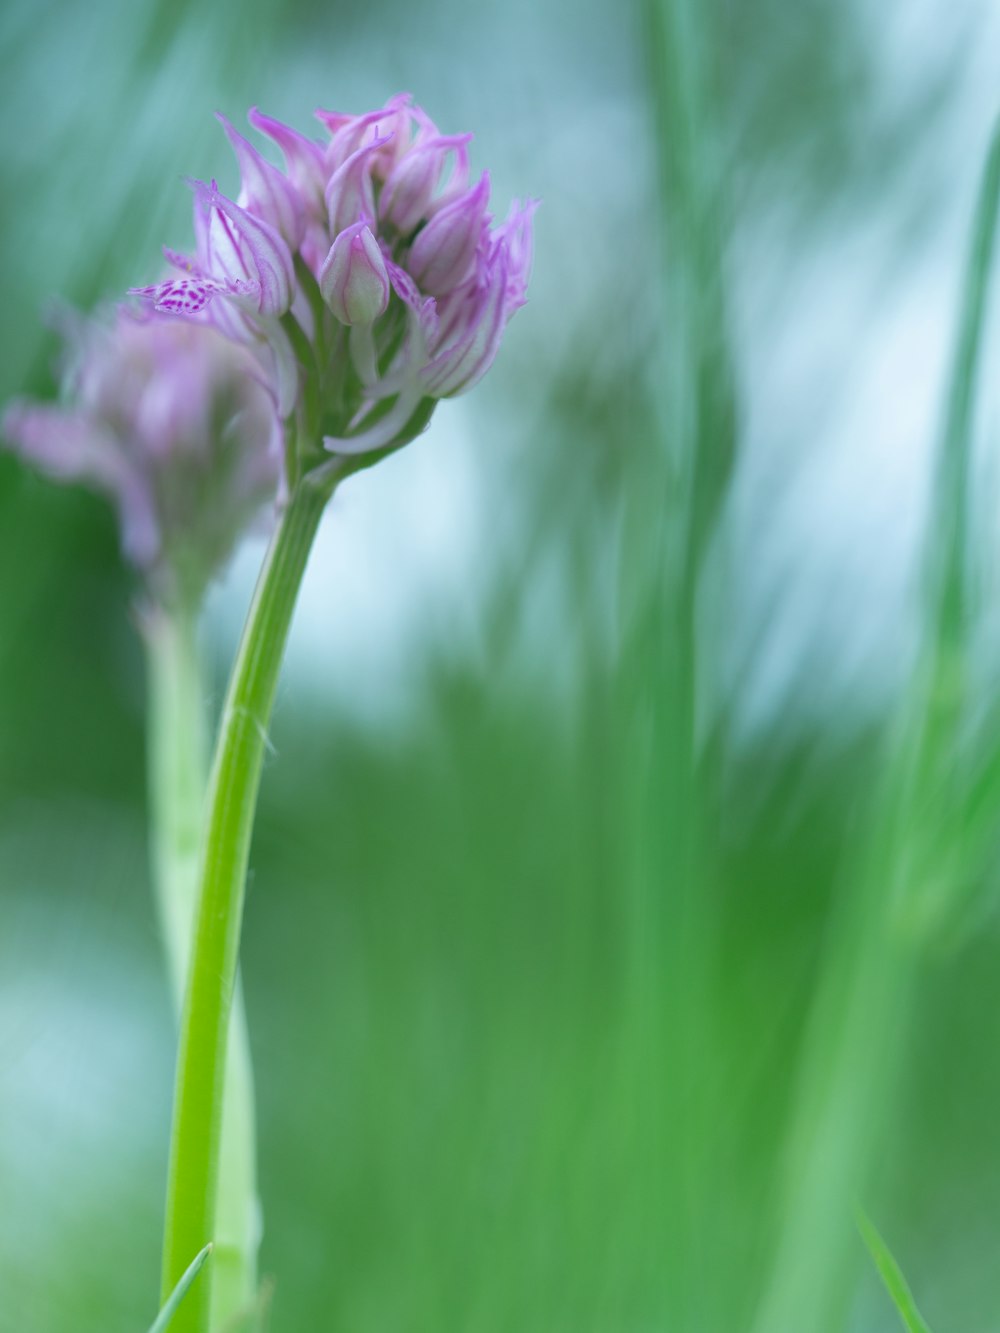 a close up of a purple flower in the grass